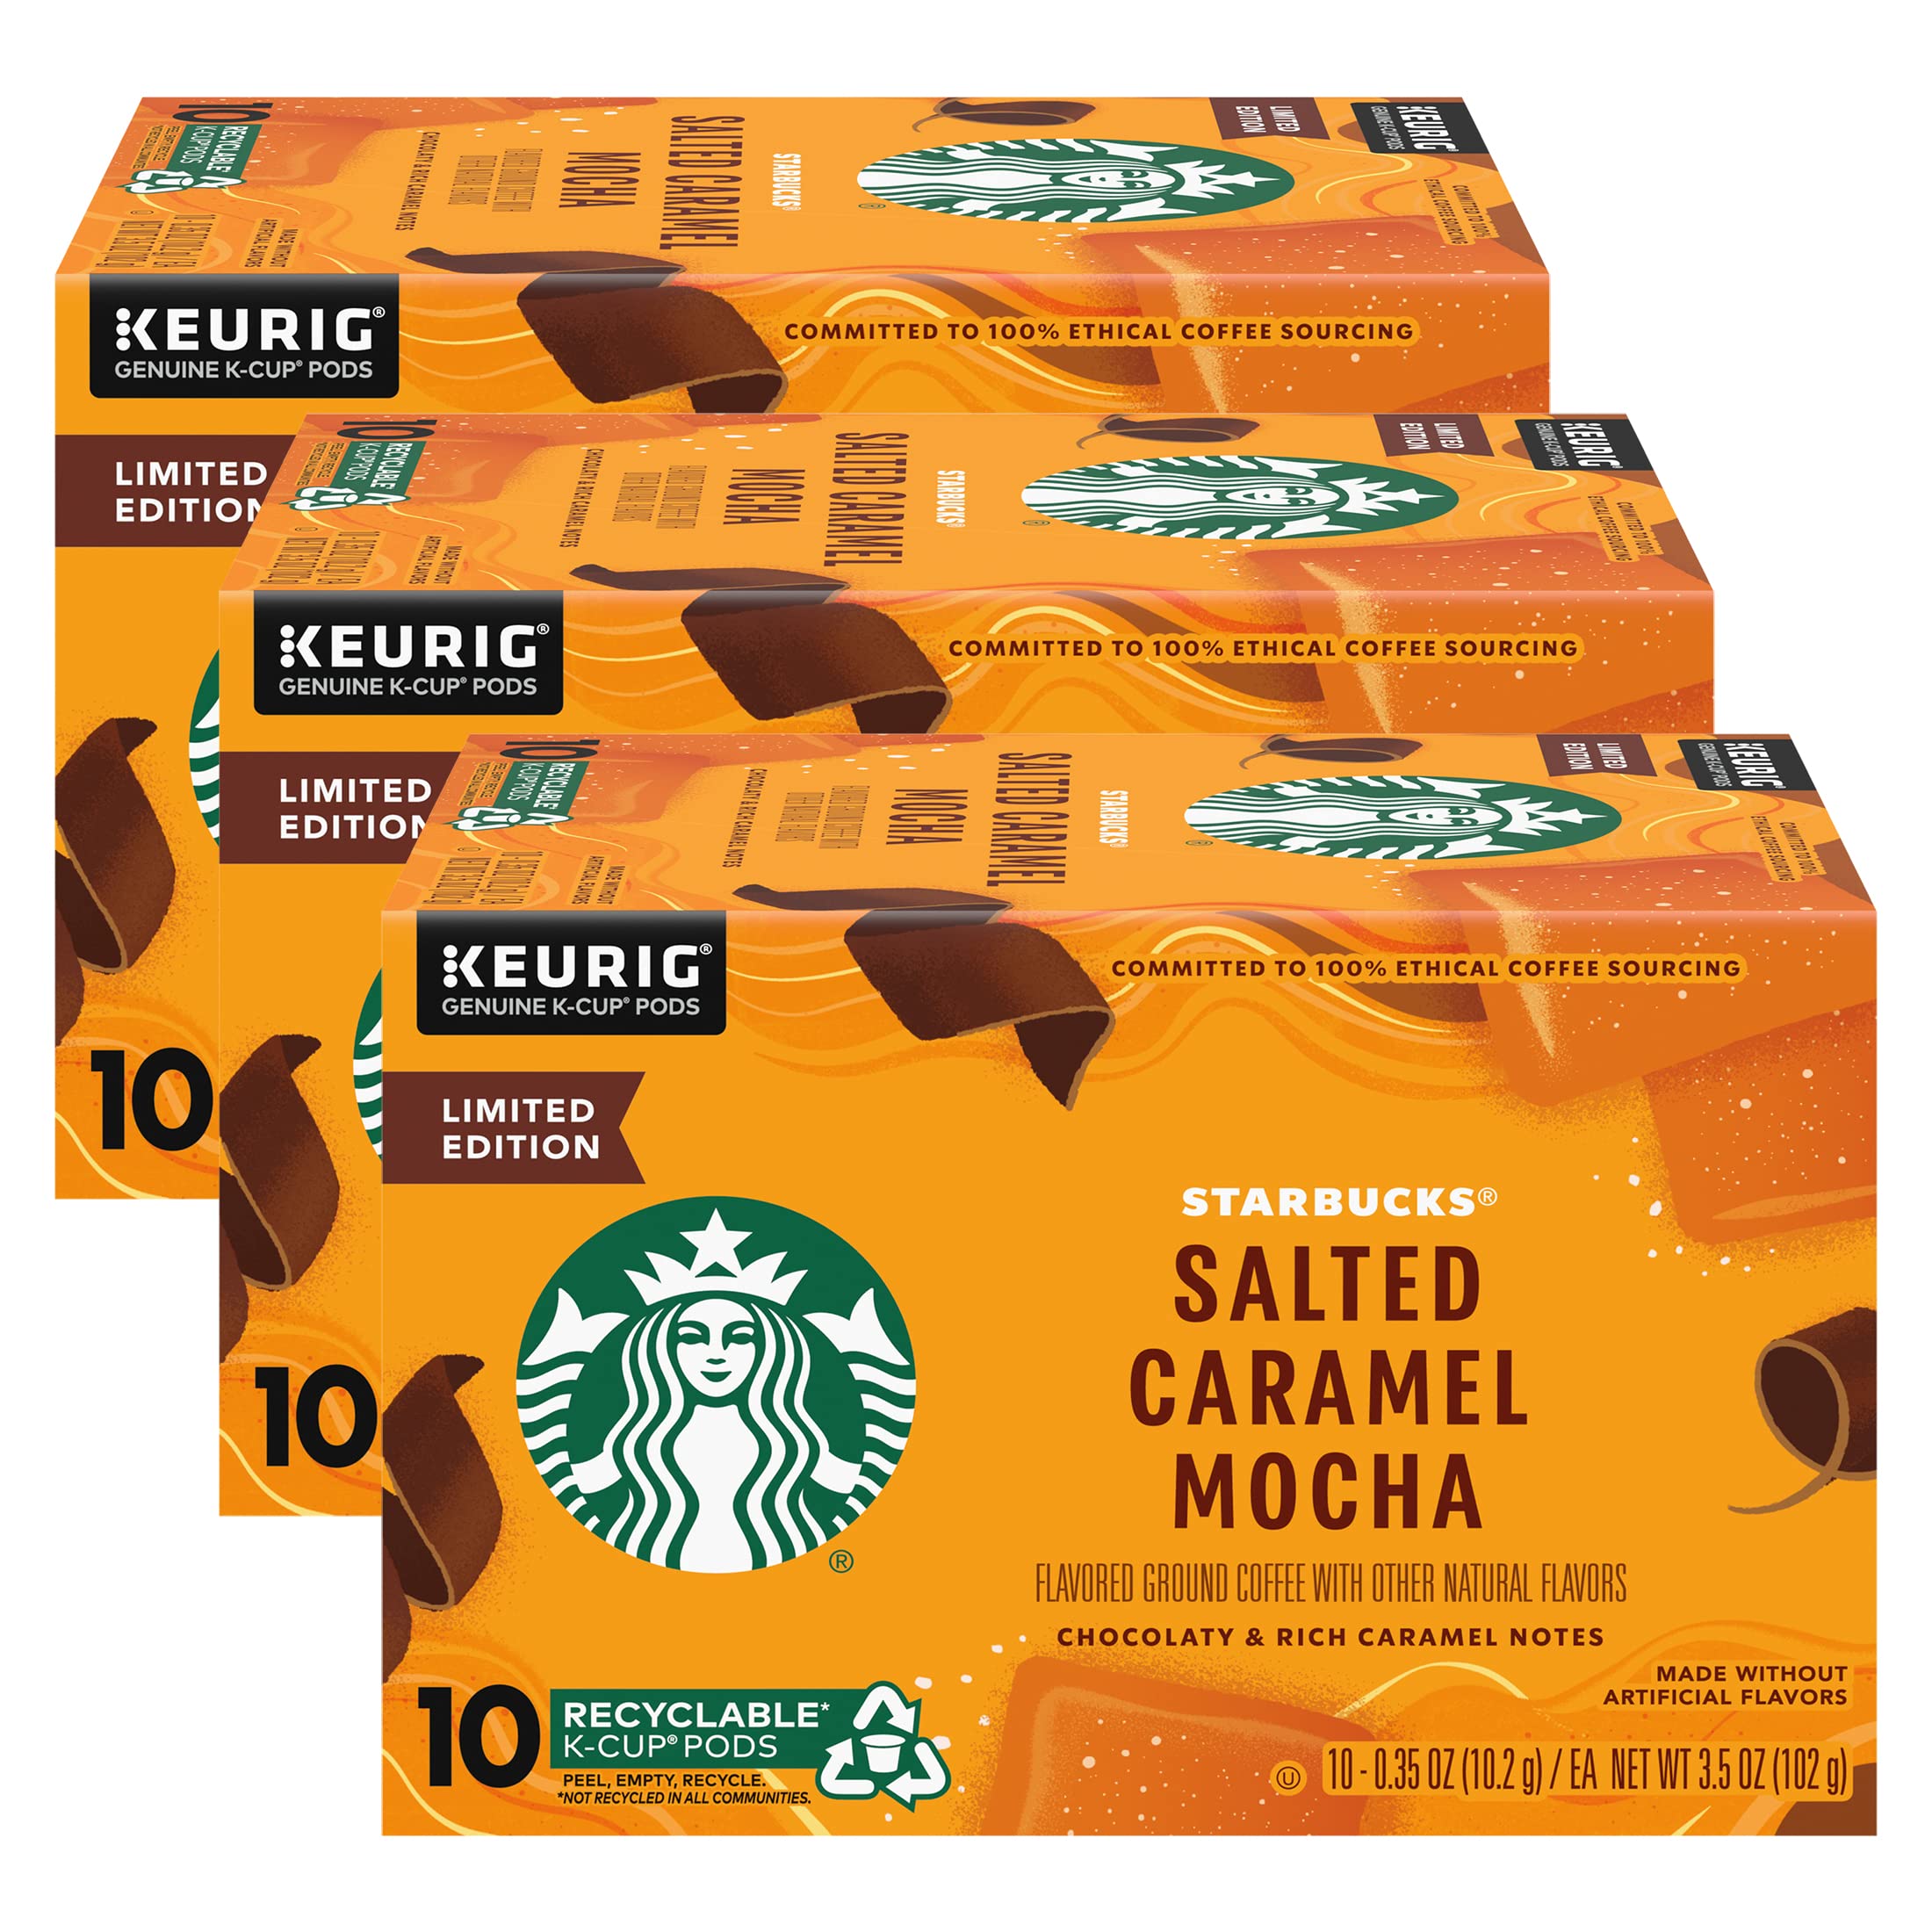 Starbucks Limited Edition Coffee K-Cups, Salted Caramel Mocha, Keurig Genuine K-Cup Pods, Chocolaty & Rich Caramel Notes, 10 CT K-Cups/Box (Pack of 3)